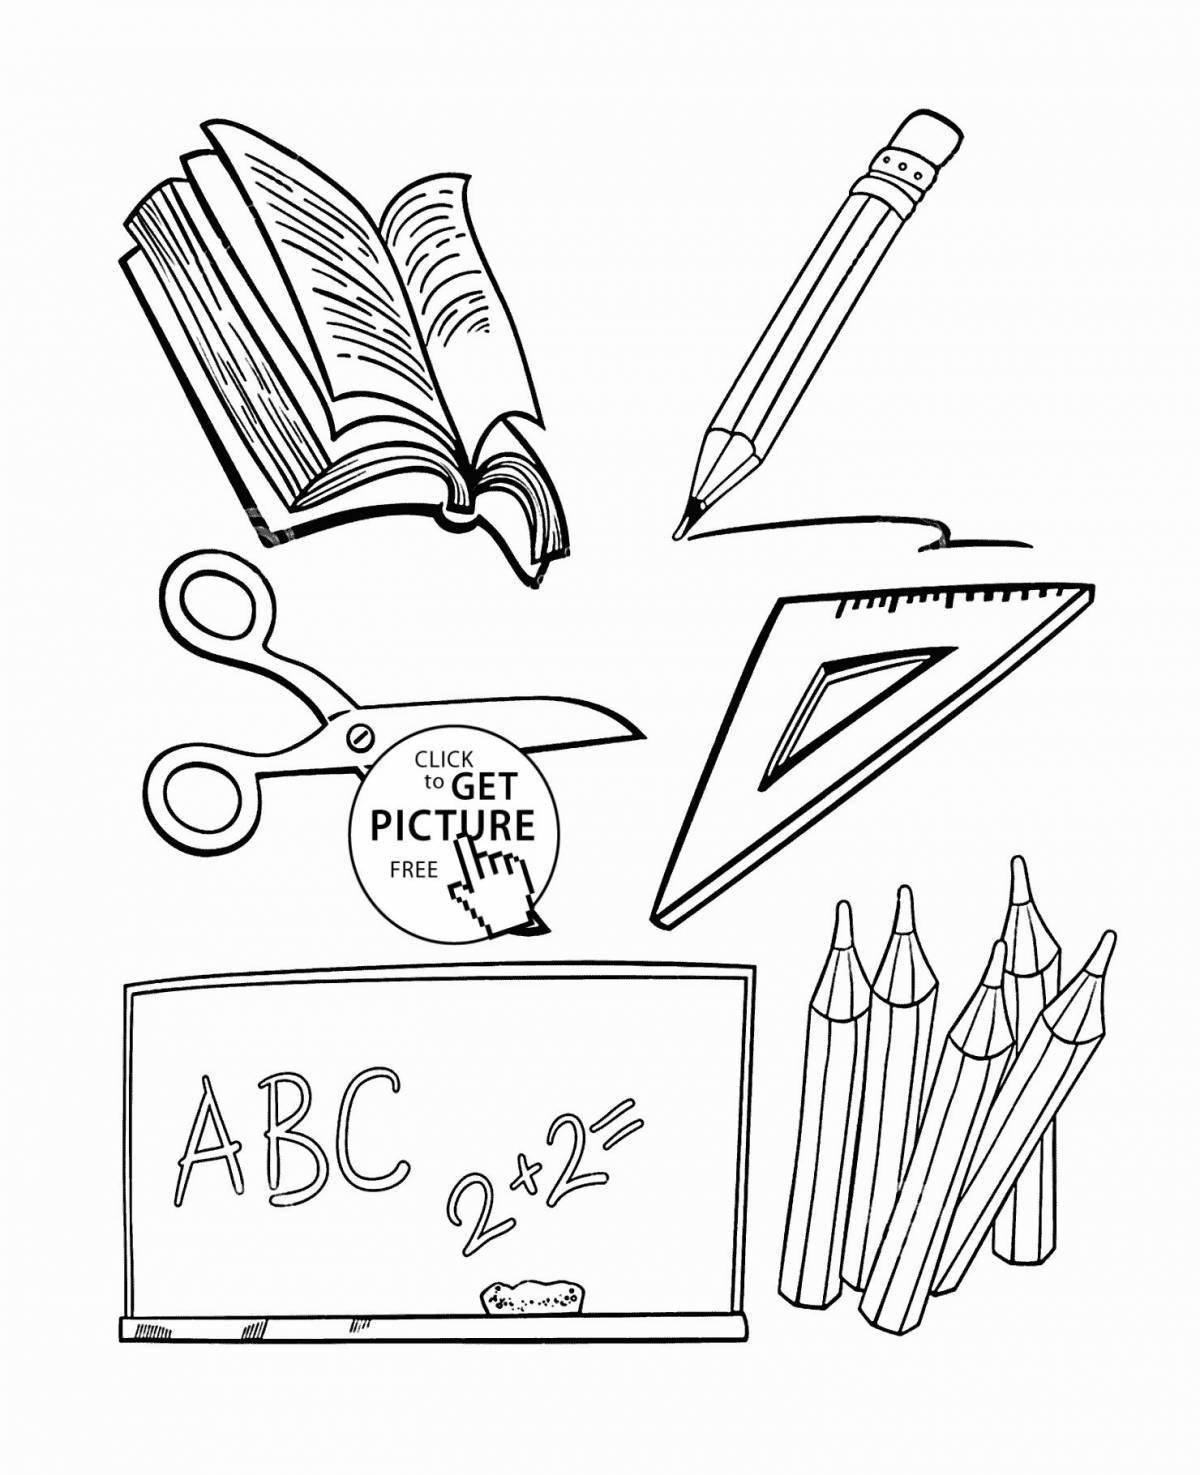 Playful school supplies coloring page